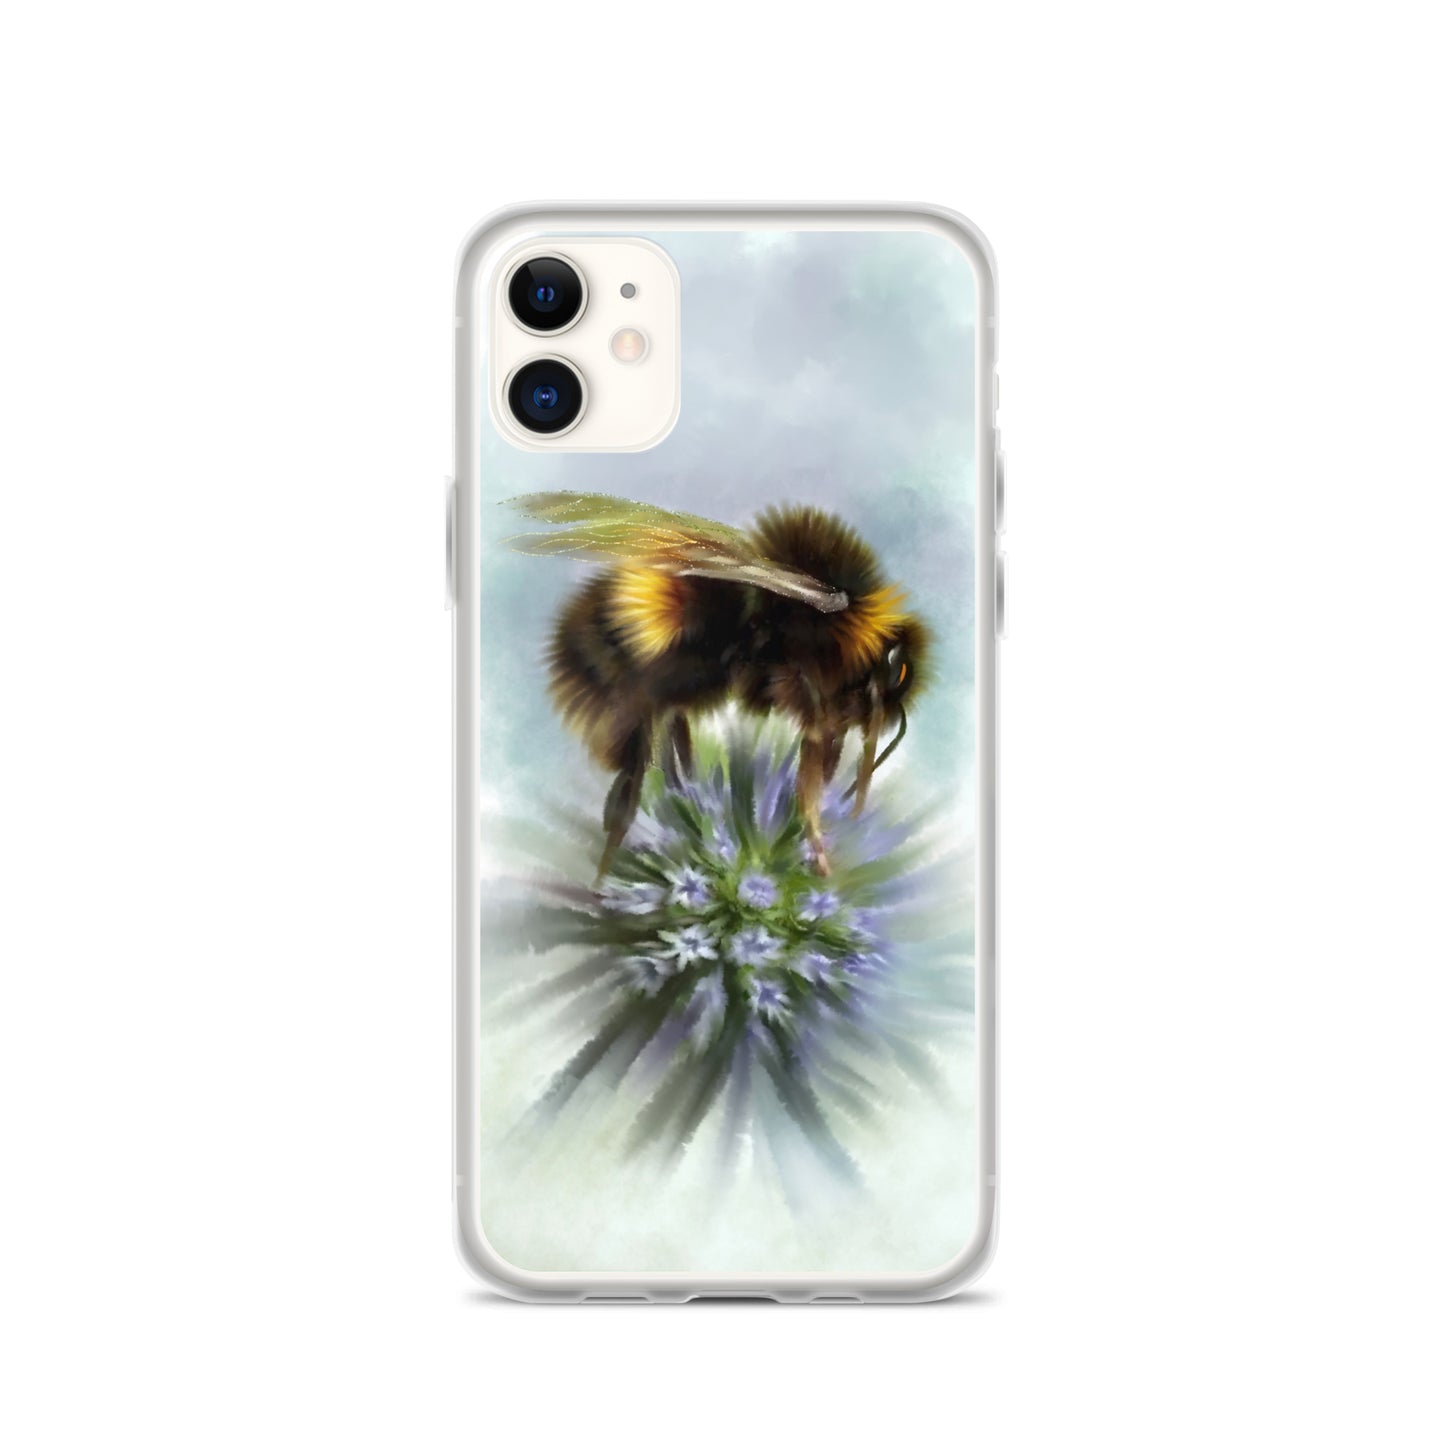 Bumble Bee Flower Floral Art with Purple Allium iPhone Case Gift Idea